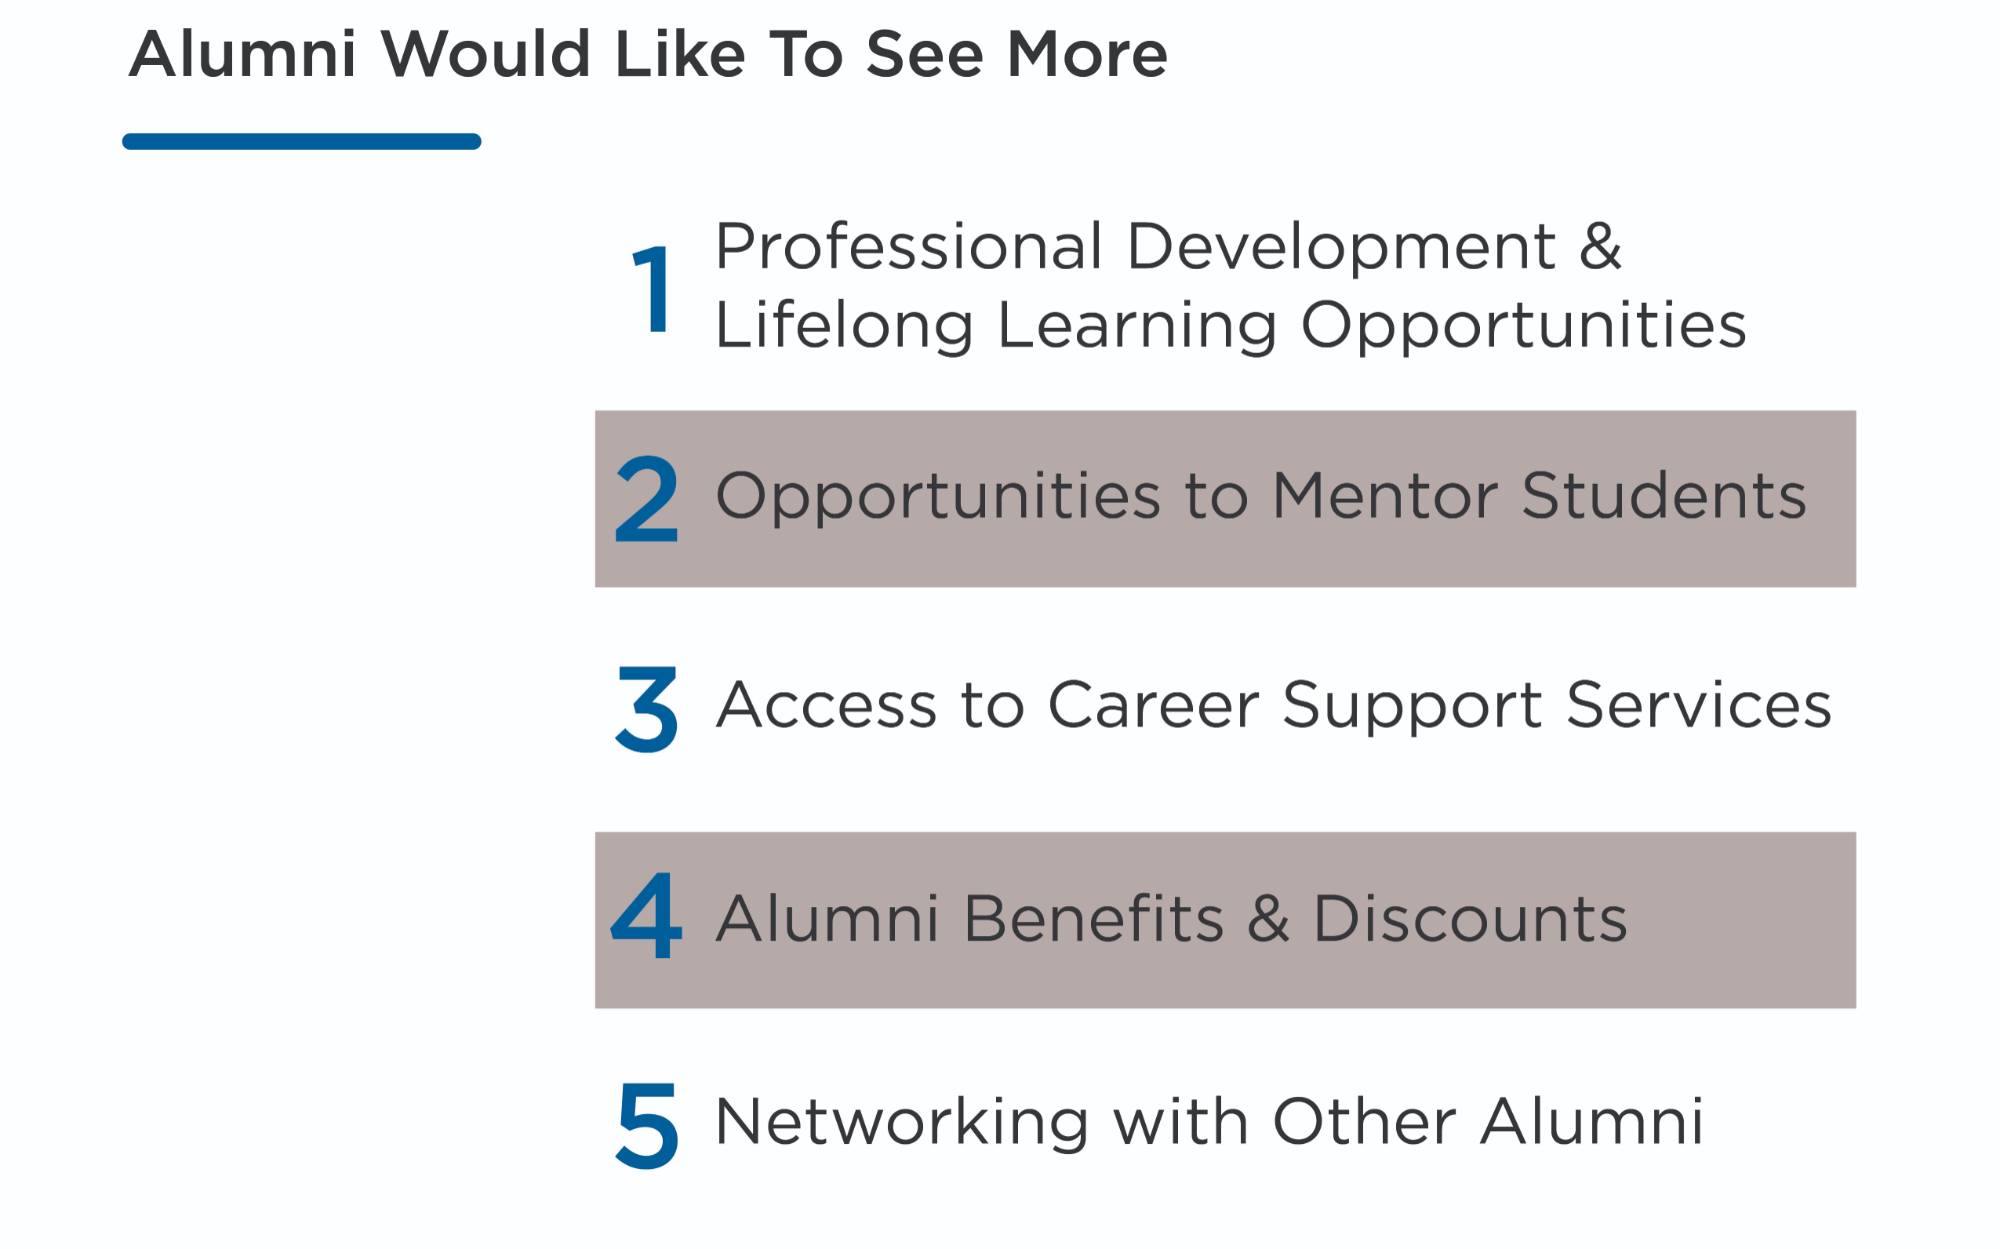 Alumni Would Like To See More. 1. Professional Development & Lifelong Learning Opportunities 2. Opportunities to Mentor Students 3. Access to Career Support Services 4. Alumni Benefits & Discounts 5. Networking with Other Alumni